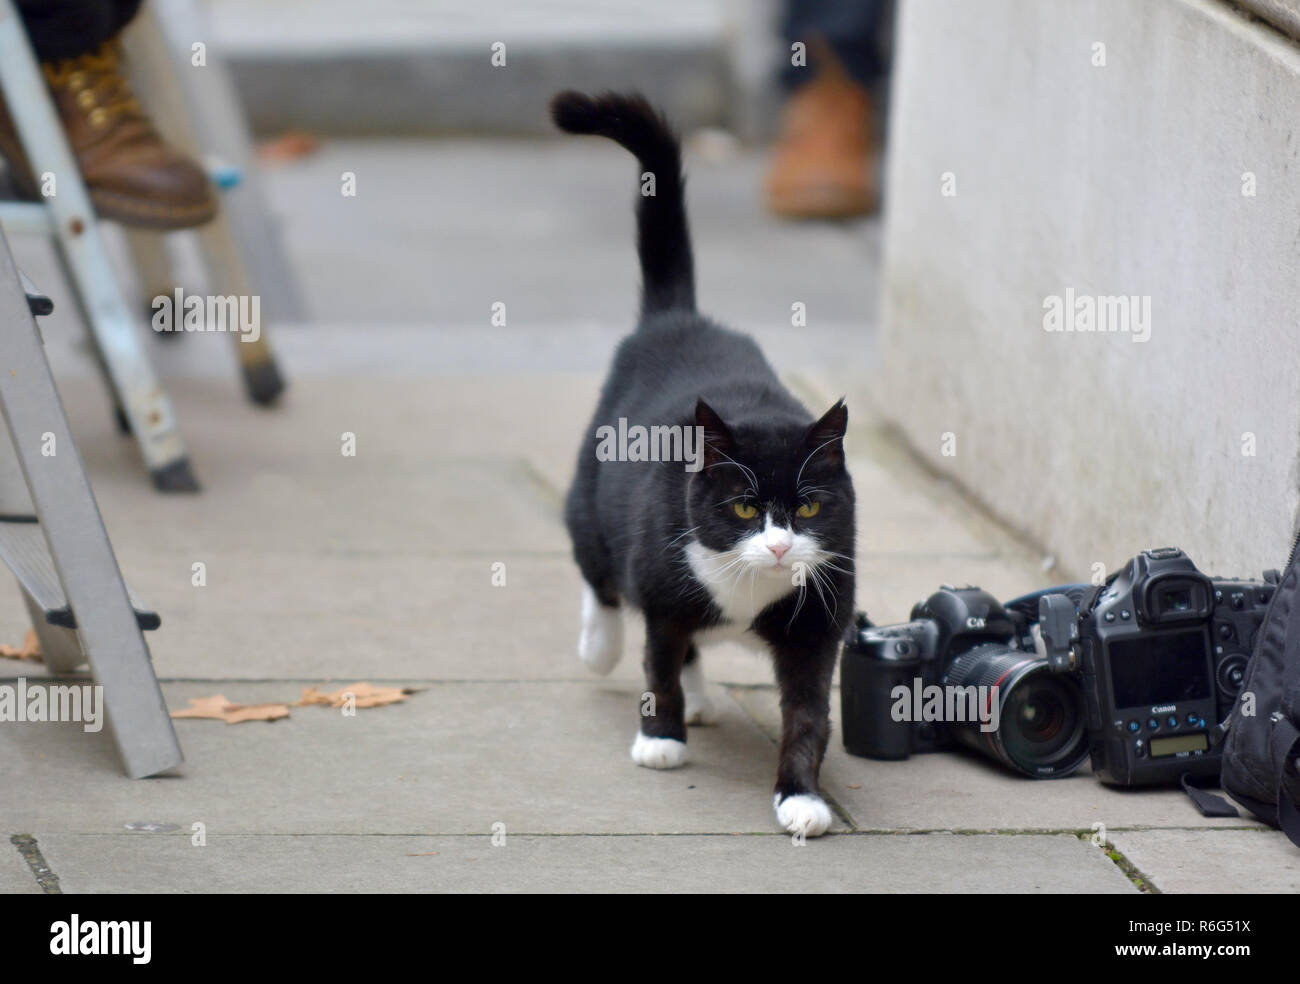 Palmerston, the Chief Mouser to the Foreign Office, in Downing Street, December 2018 checking out the photographers Stock Photo